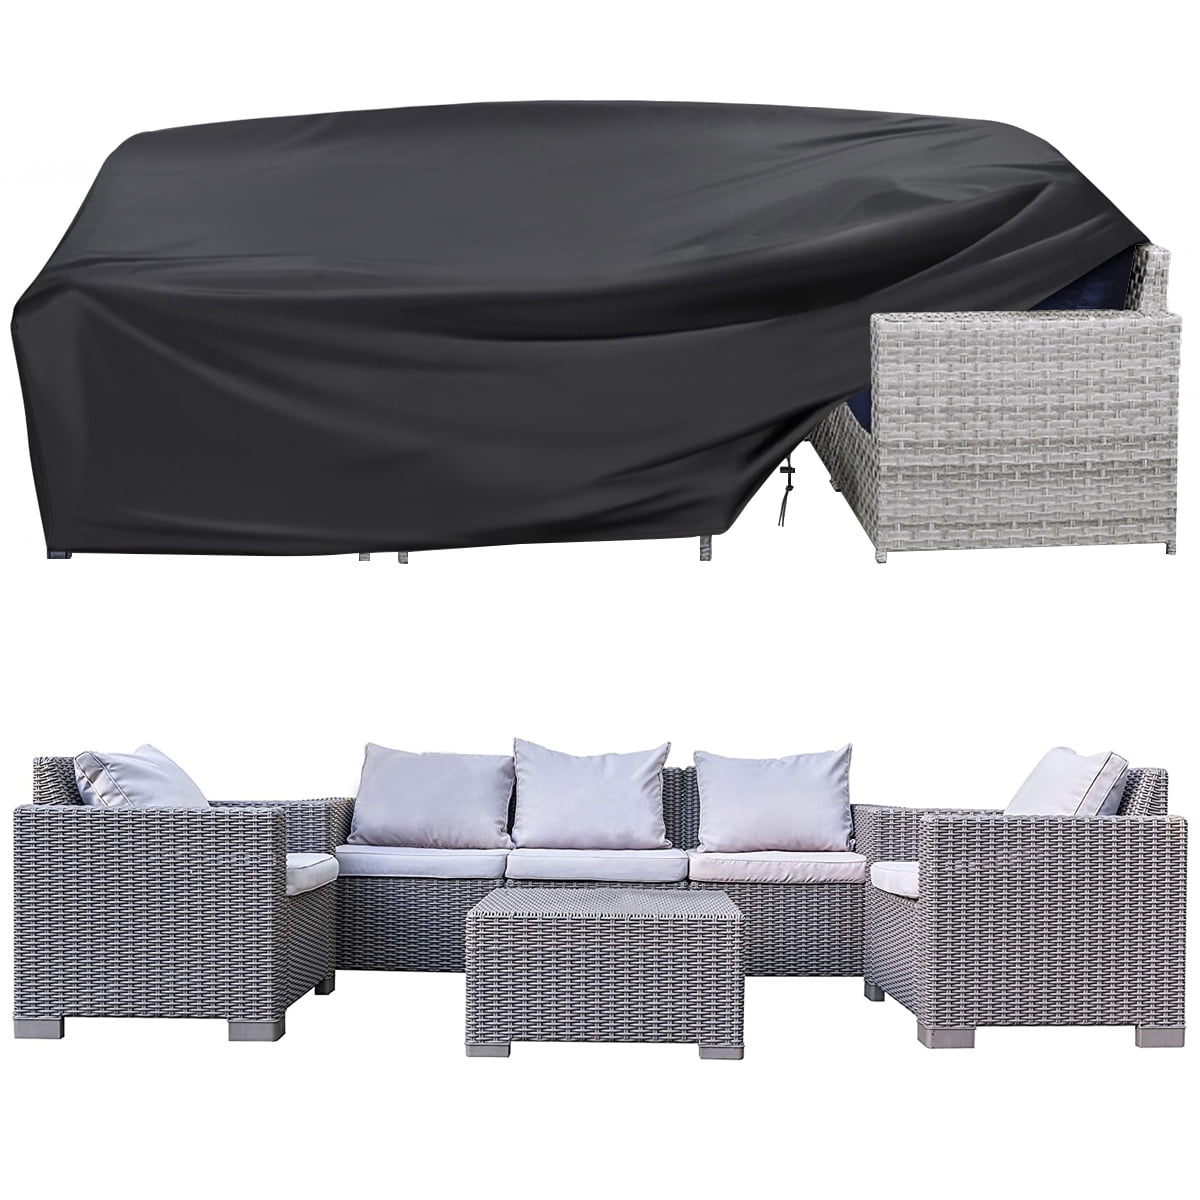 Heavy Duty Rattan Garden Furniture Covers Patio Outdoor Large Waterproof Cover 